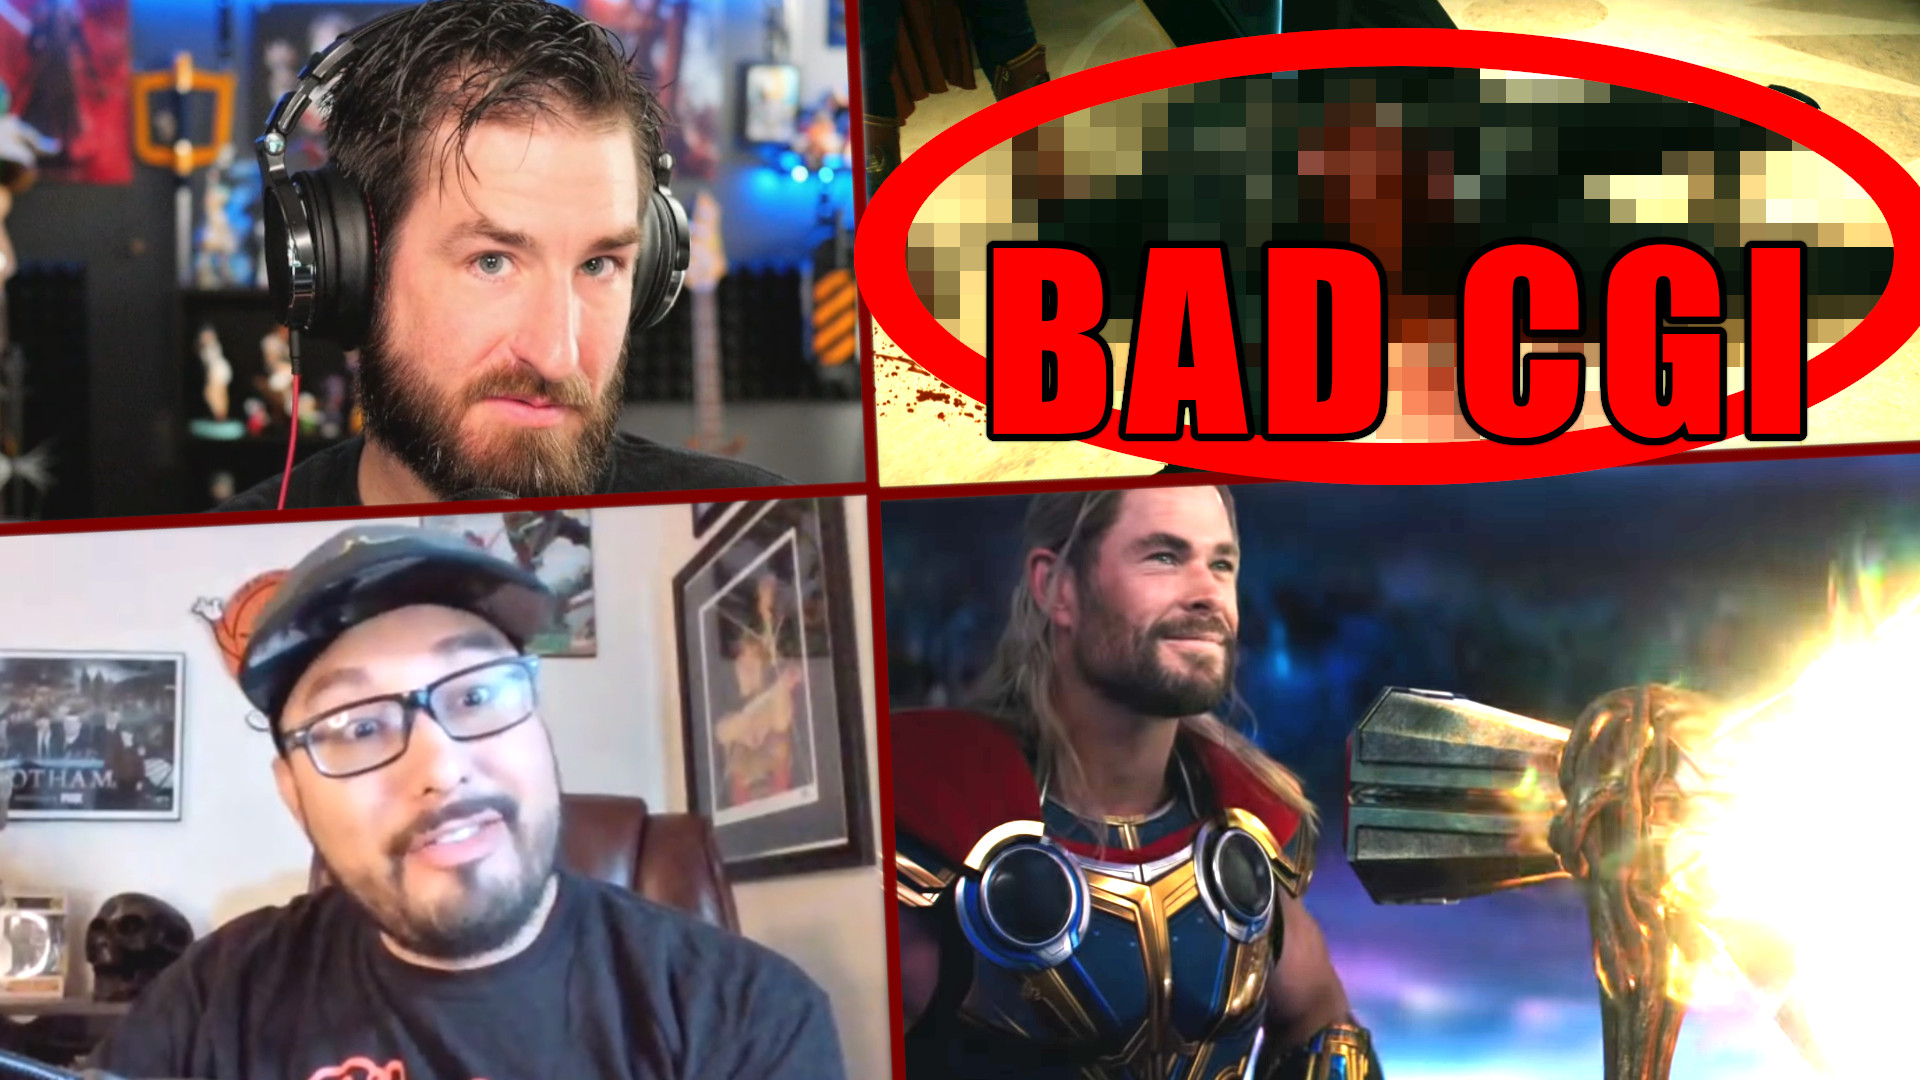 A Thumbnail For The Daily Cup Of Genre Podcast Featuring Hosts Kyle And Manny. Topic Images Include Thor From Thor Love And Thunder And A Pixelated Image From The Boys Season 3